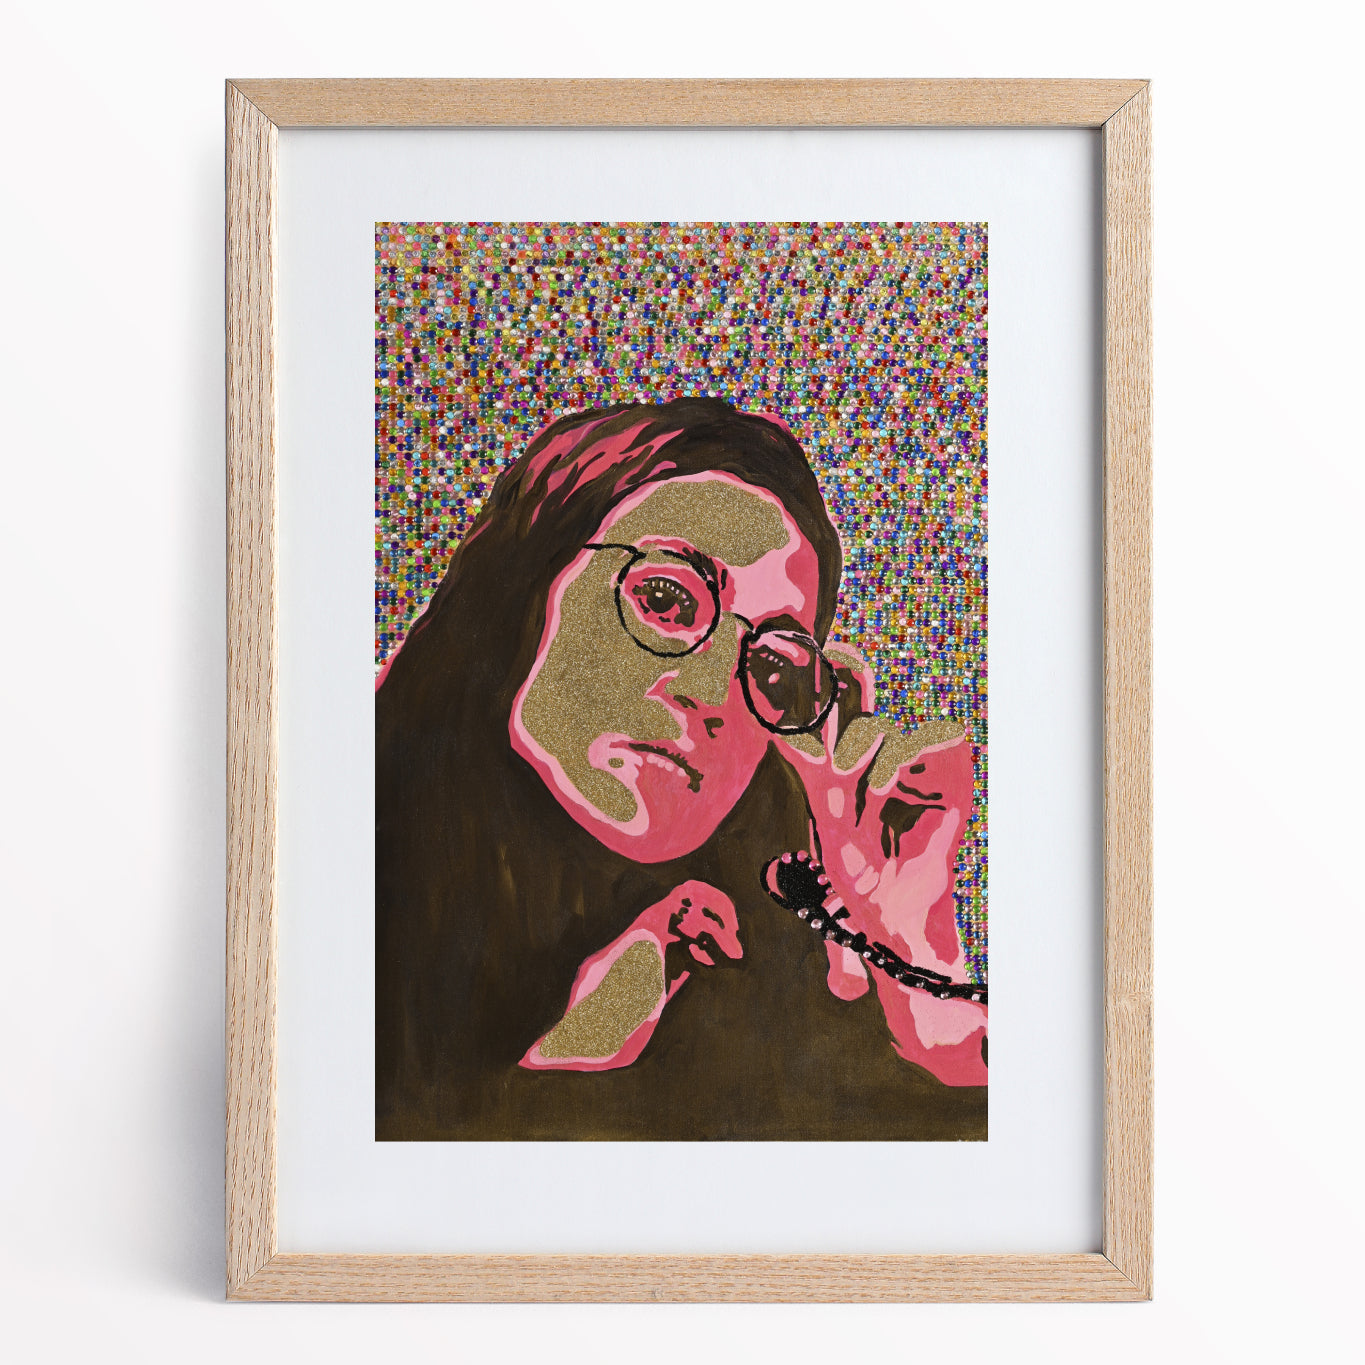 Natalie Zoghby's portrait of Alexandria Ocasio-Cortez archival print. Framed inside a light wood framed and white mat board. AOC is hot pink and gold with a funky look. Jewels cover the background